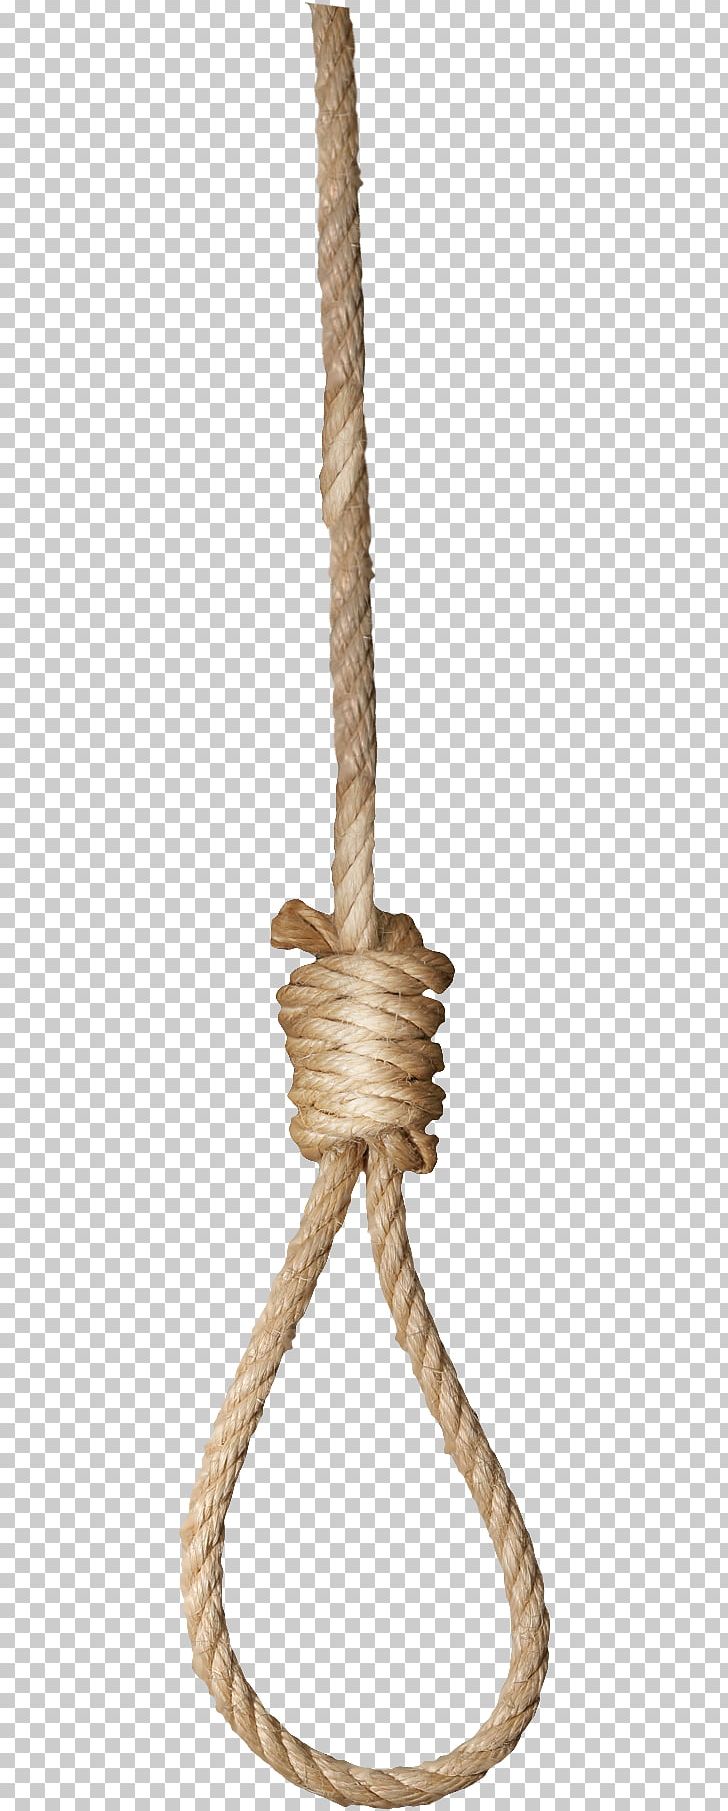 Rope Knot PNG, Clipart, Brown, Brown Rope, Buttonhole, Chinese Knot, Digital Image Free PNG Download